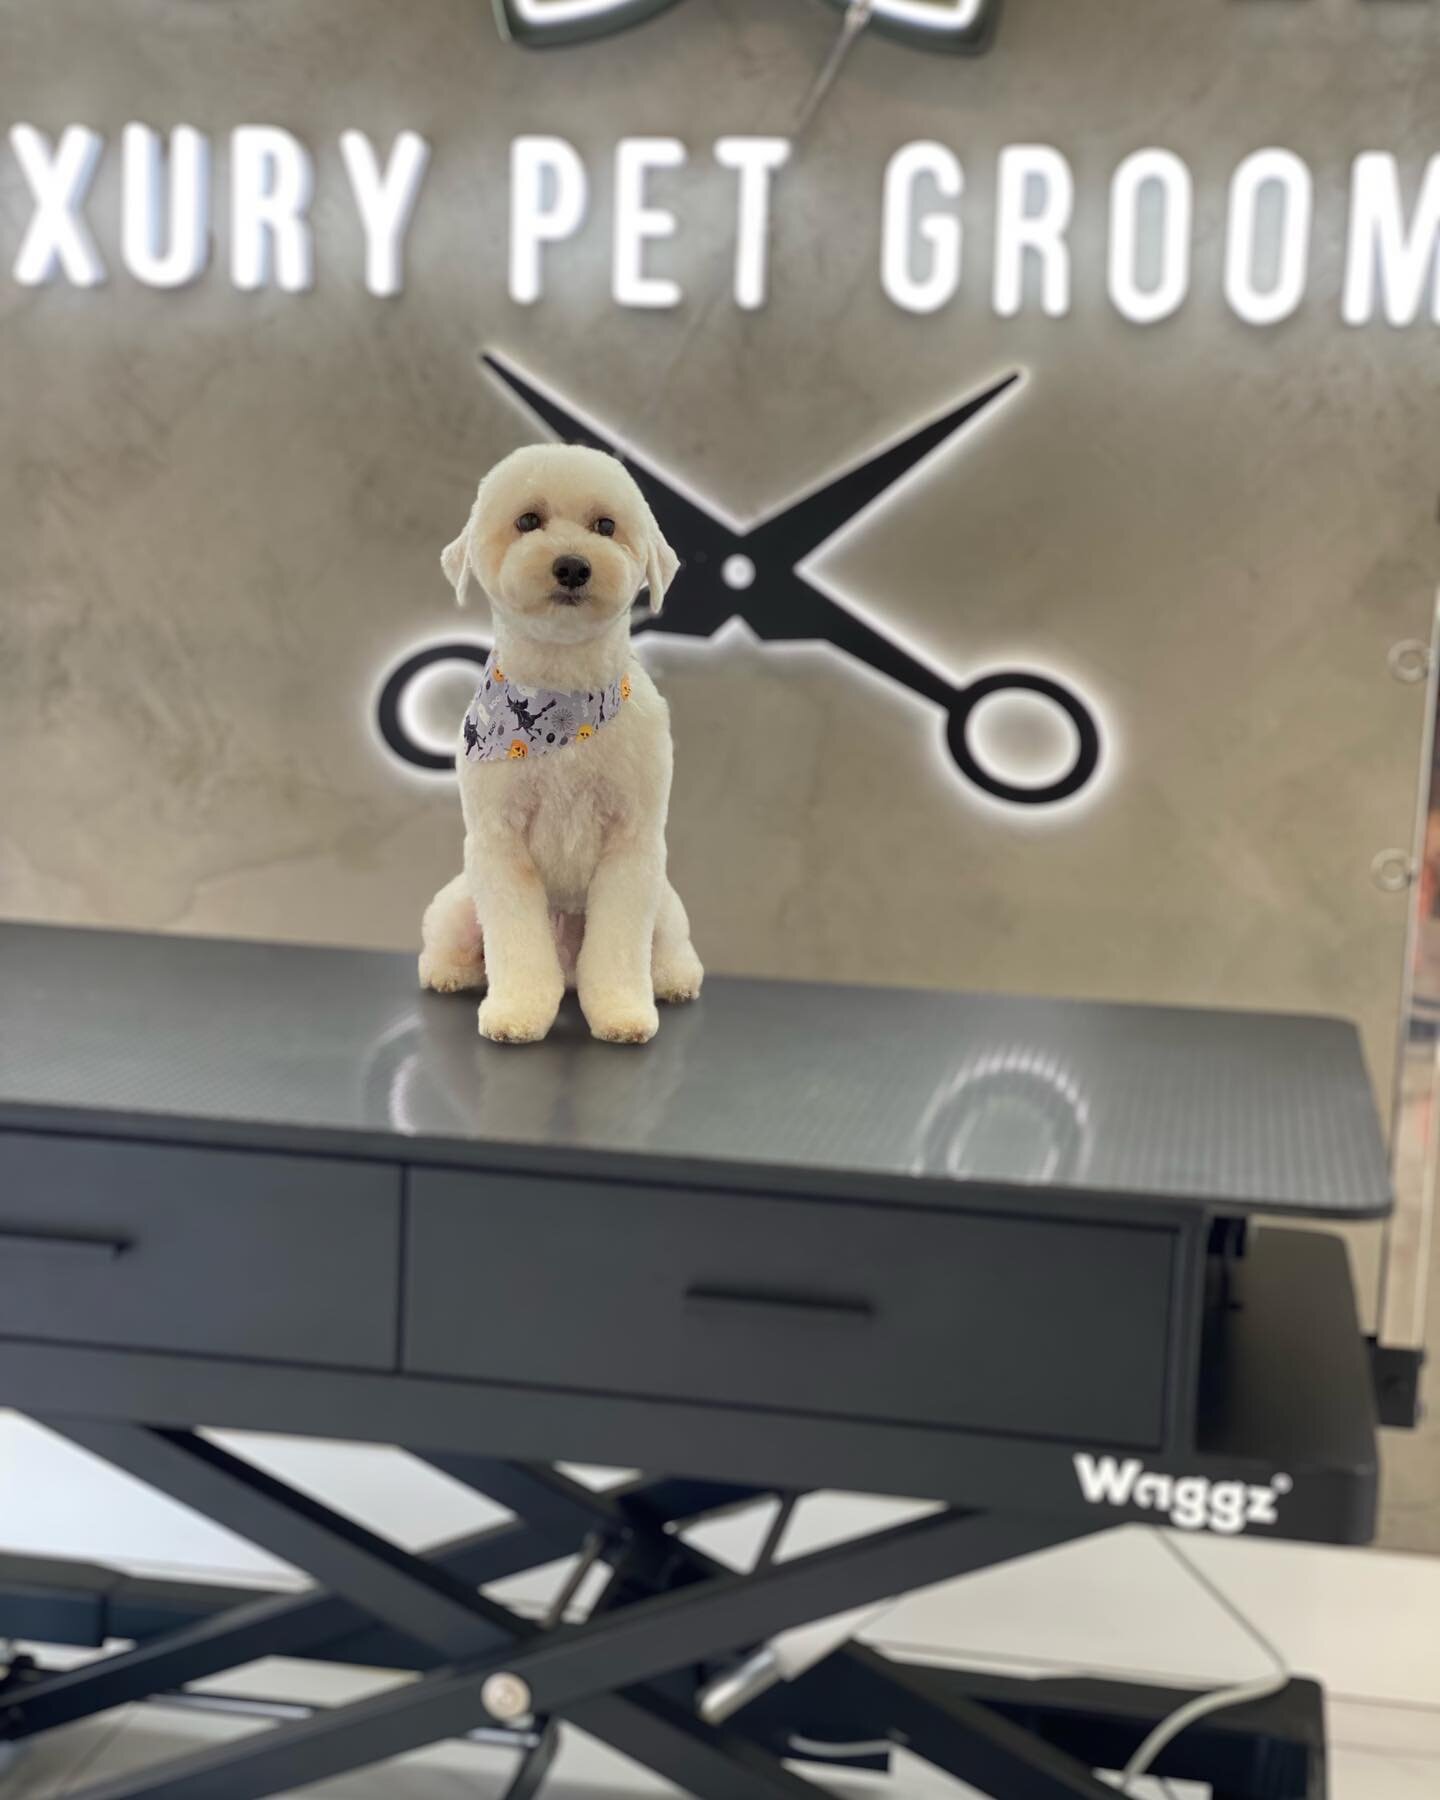 See grooming isn&rsquo;t that bad 👌🏼

I think we should leave one of these cool @waggzgrooming table up front for pictures 

Book your next appointment by visiting our website www.pawsatmain.com ✅